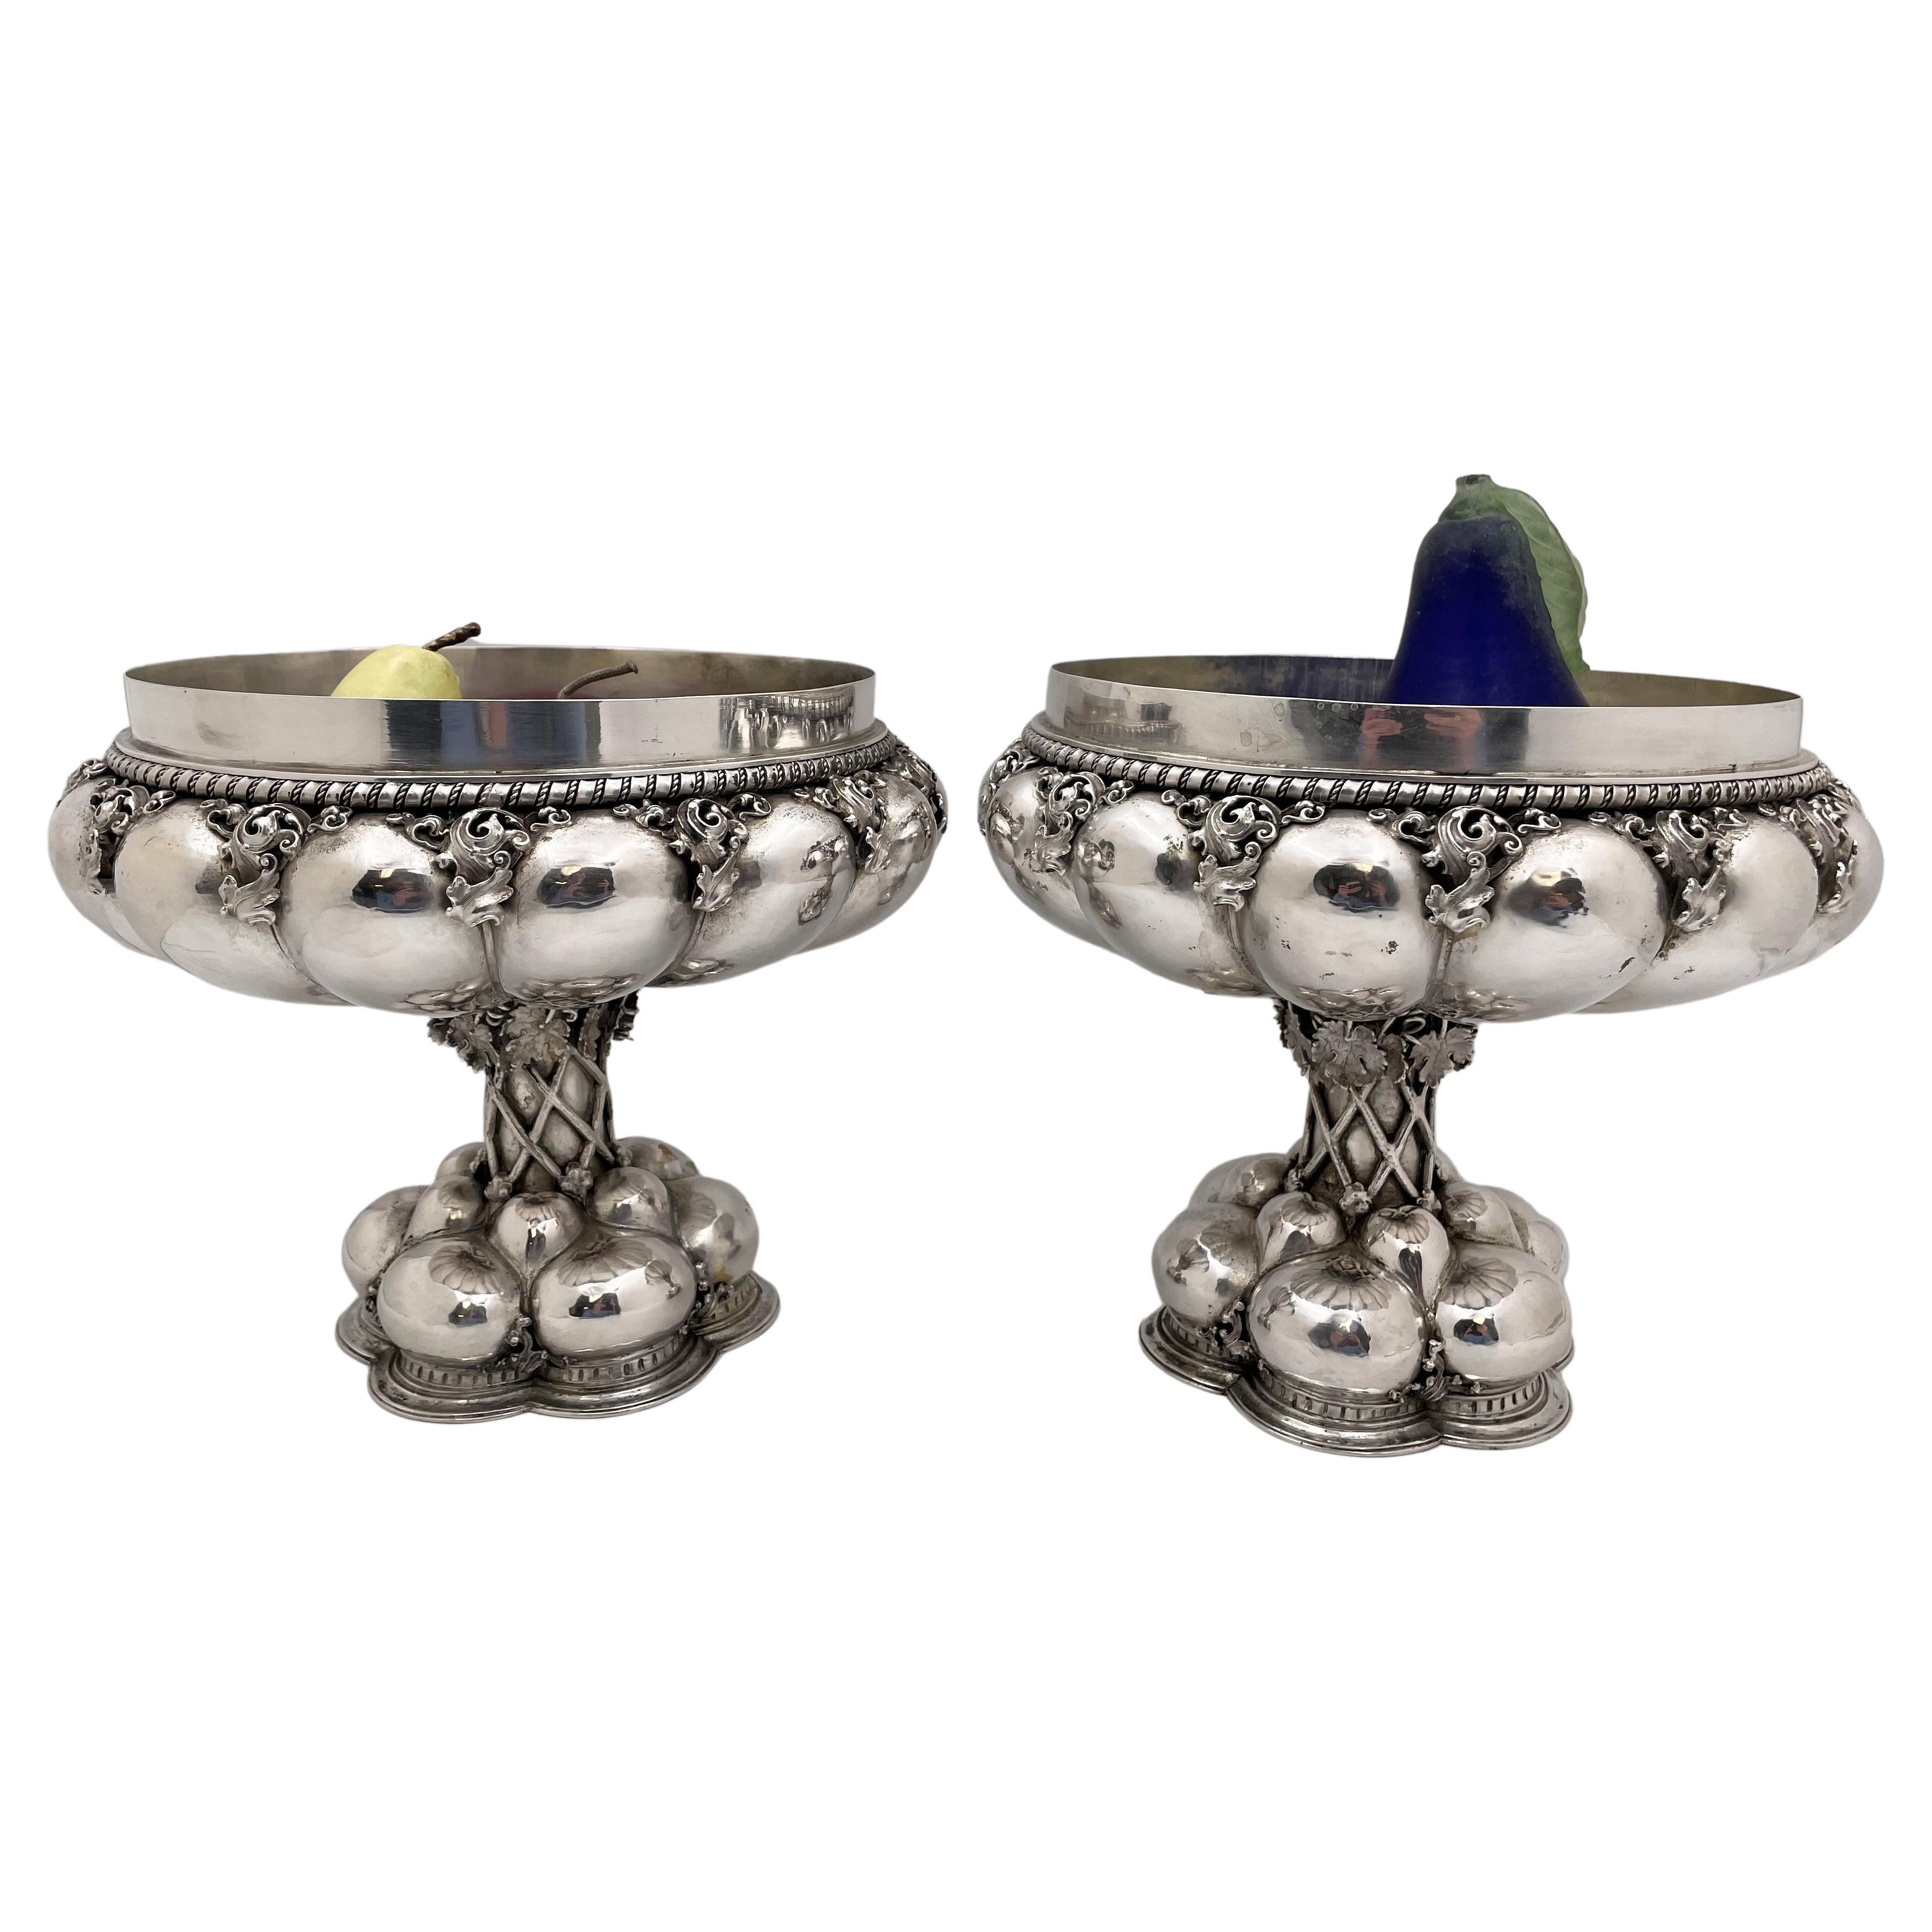 German Continental Silver Pair of 19th Century Compotes/Footed Centerpiece Bowls